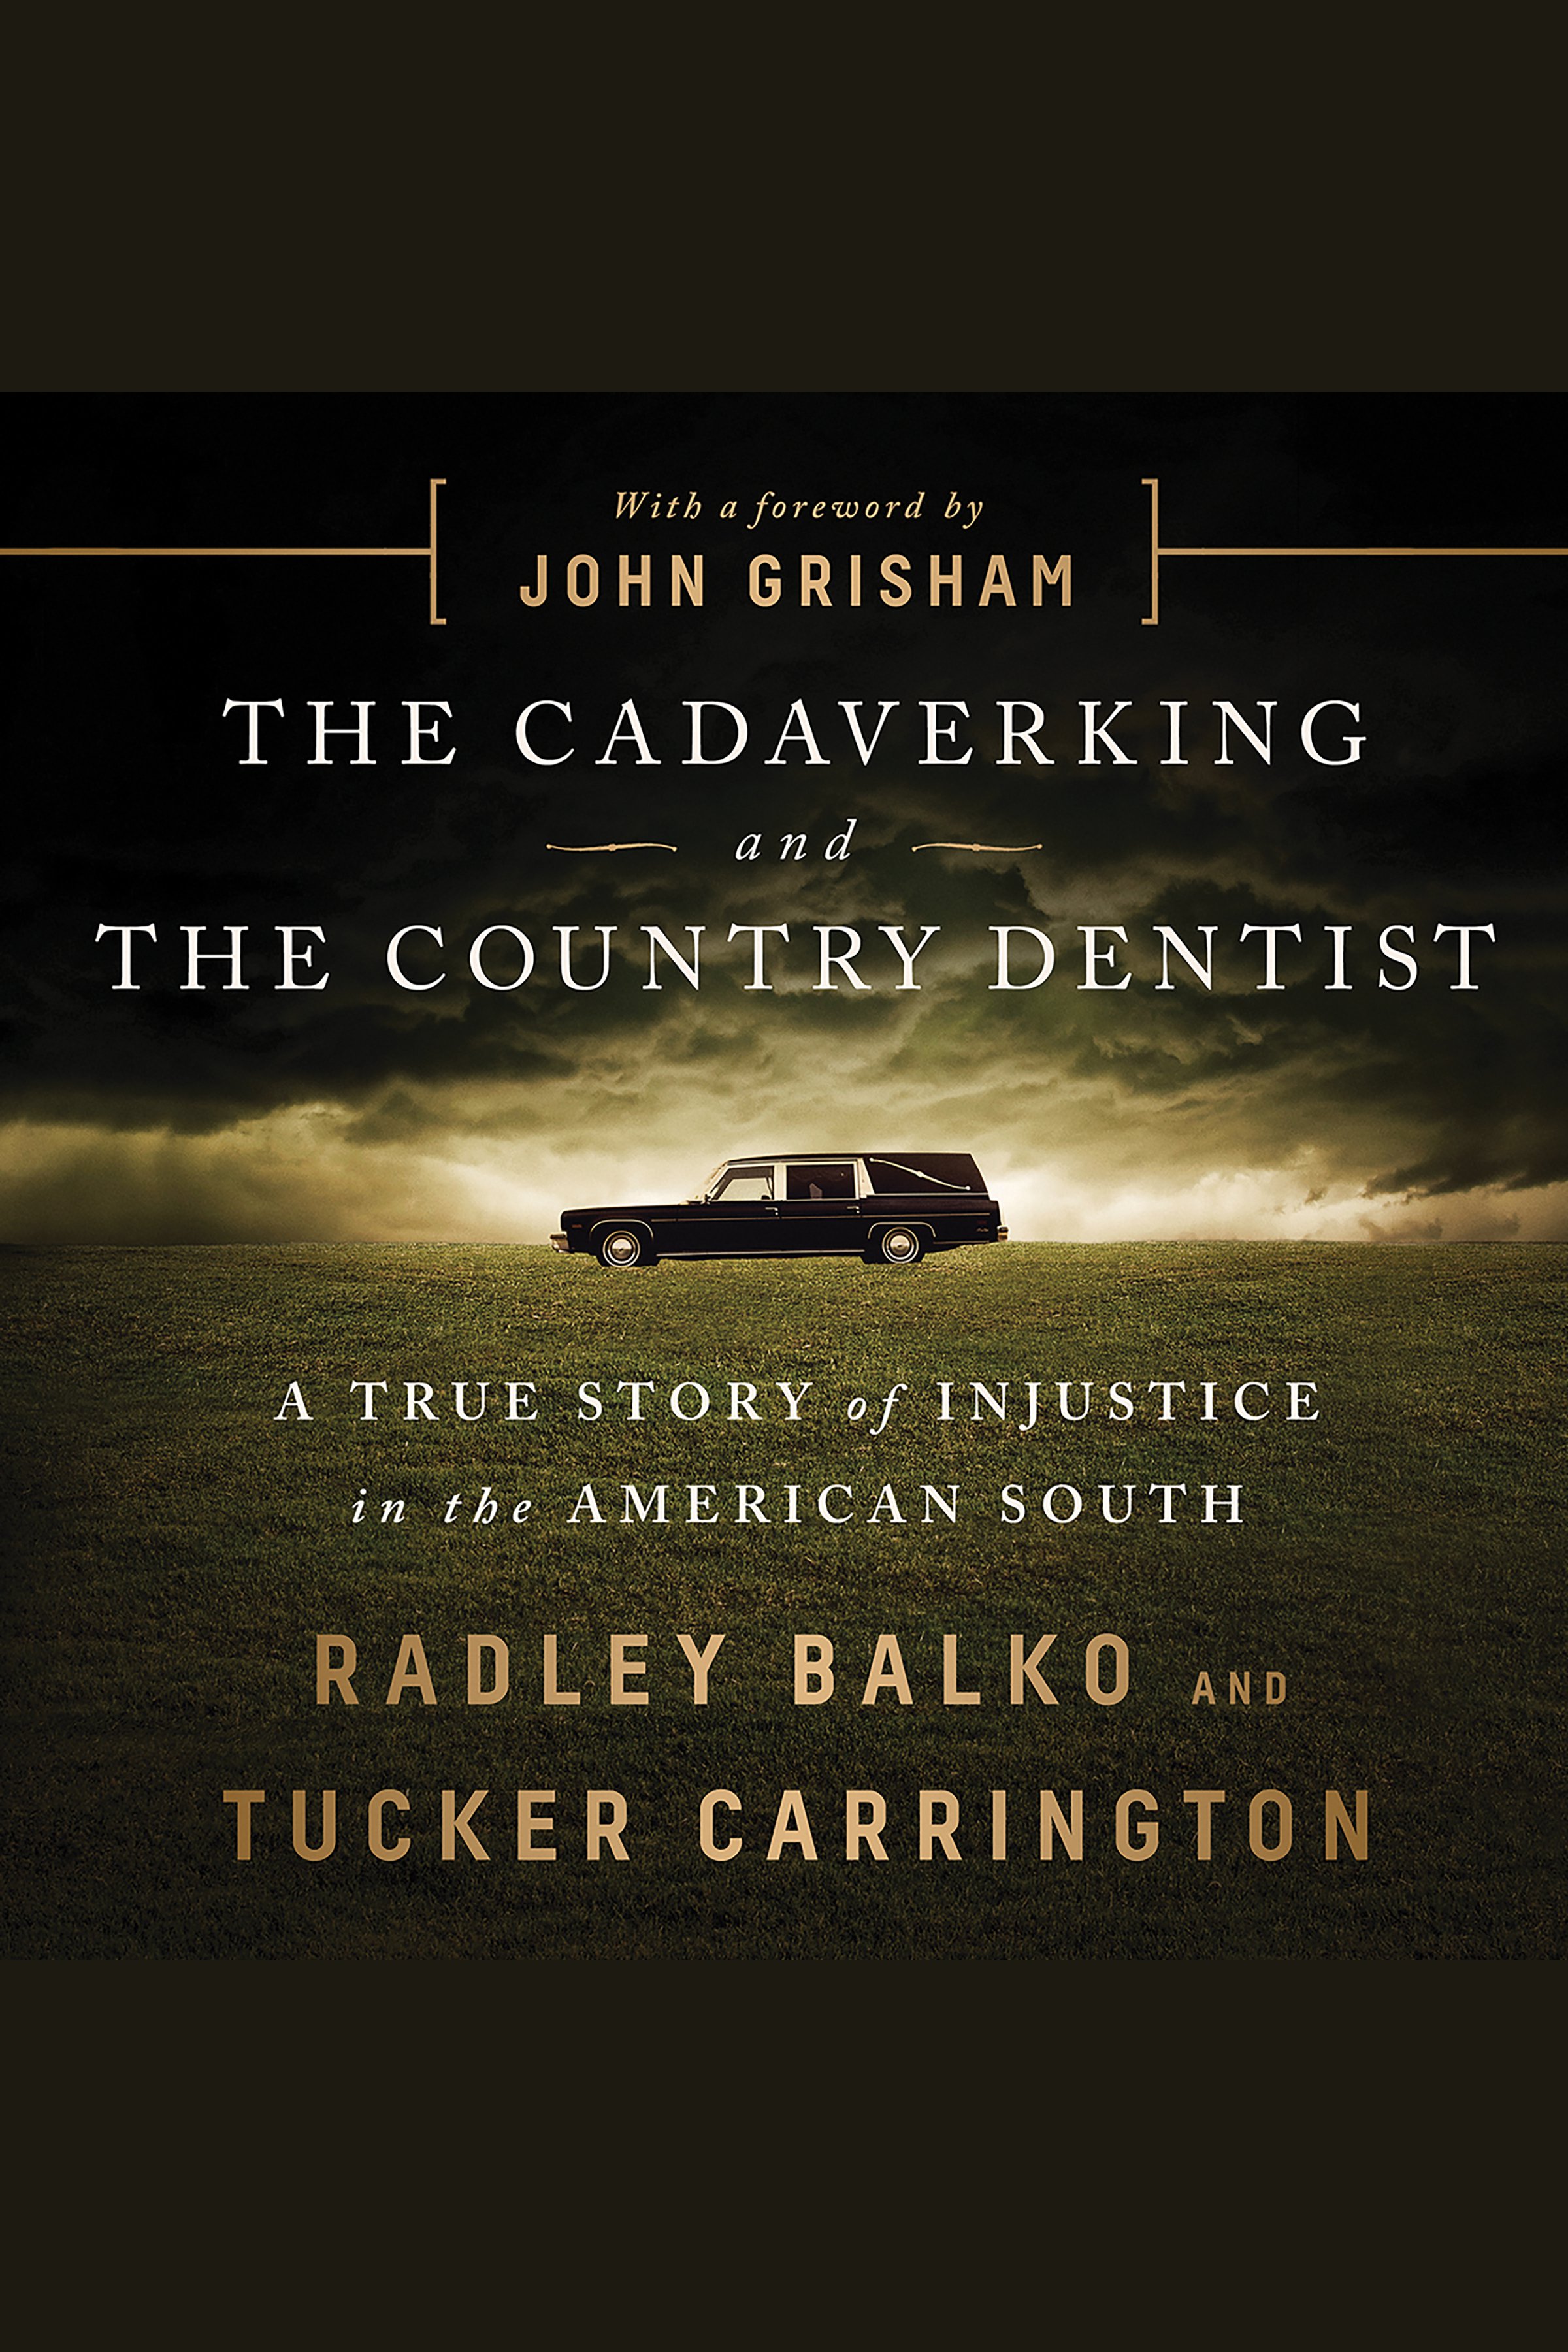 Umschlagbild für Cadaver King and the Country Dentist, The [electronic resource] : A True Story of Injustice in the American South